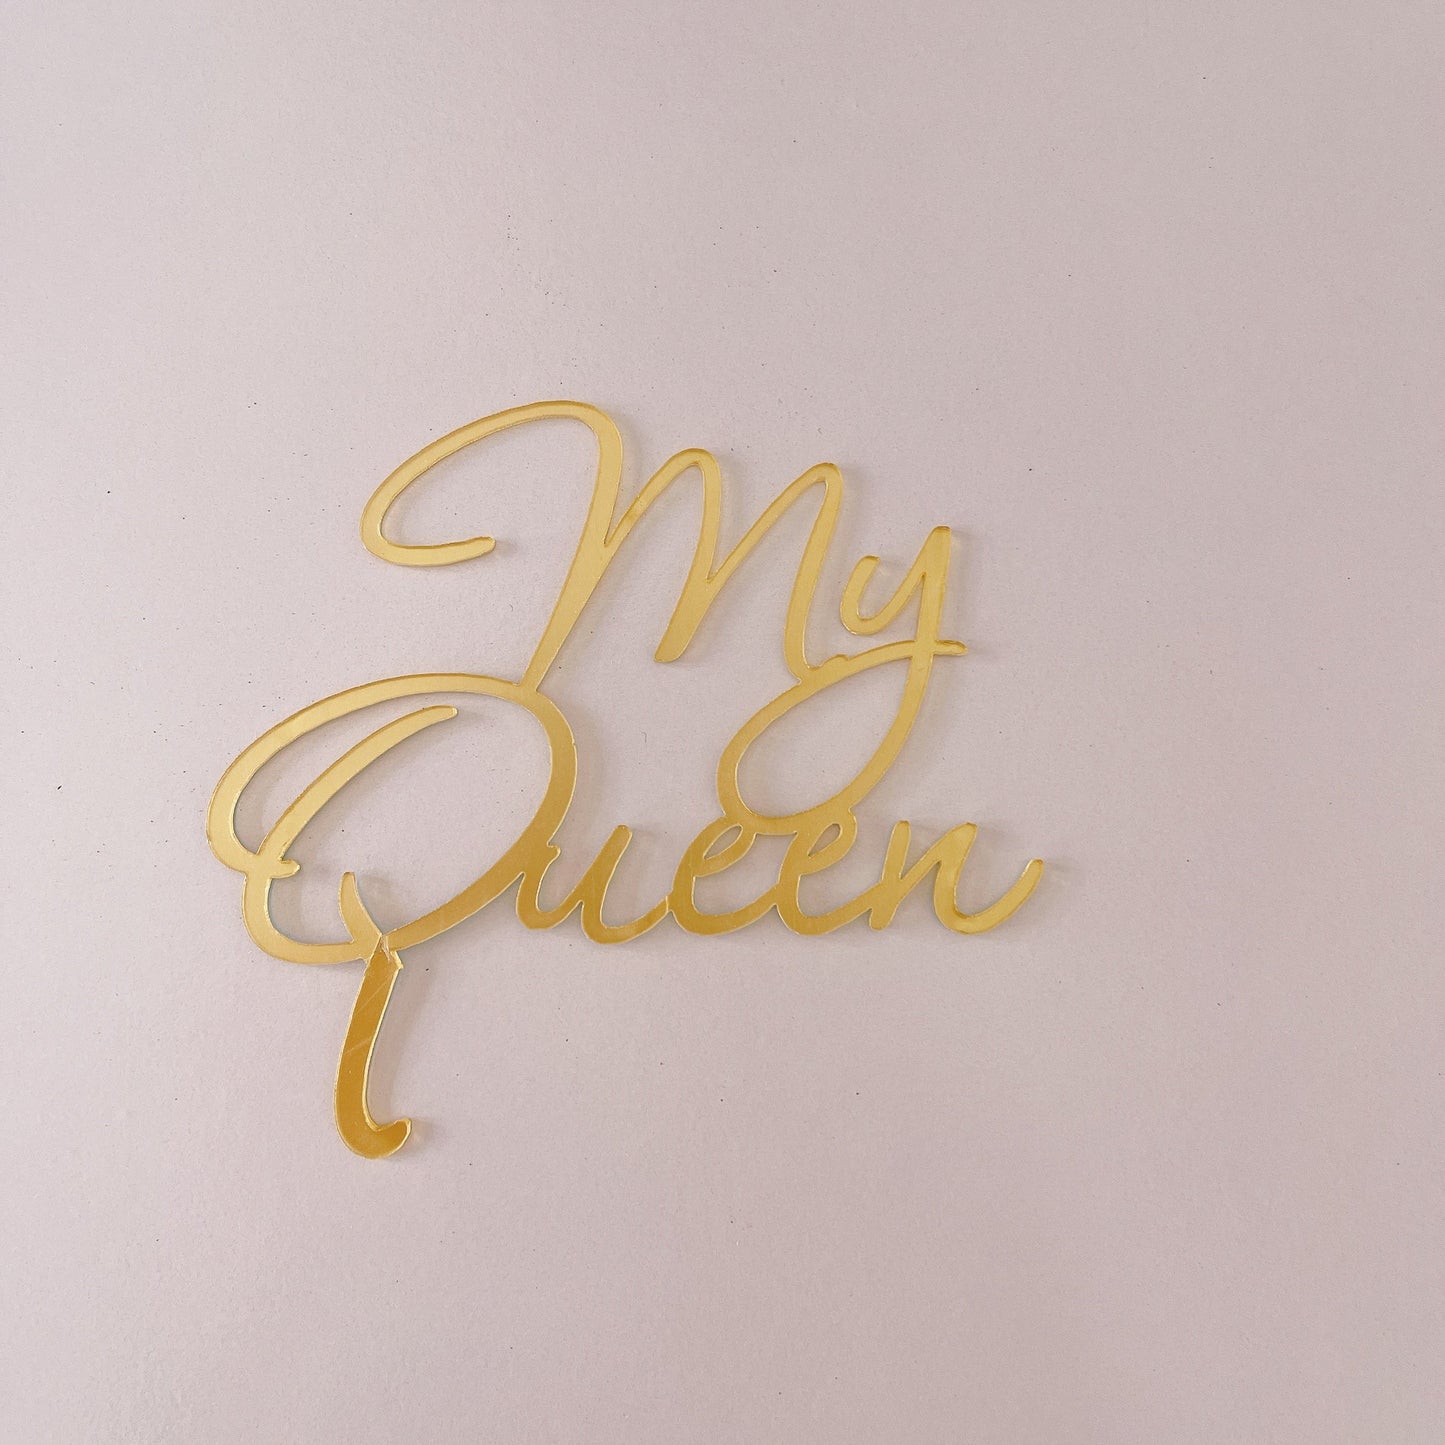 My Queen Gold Acrylic Fropper